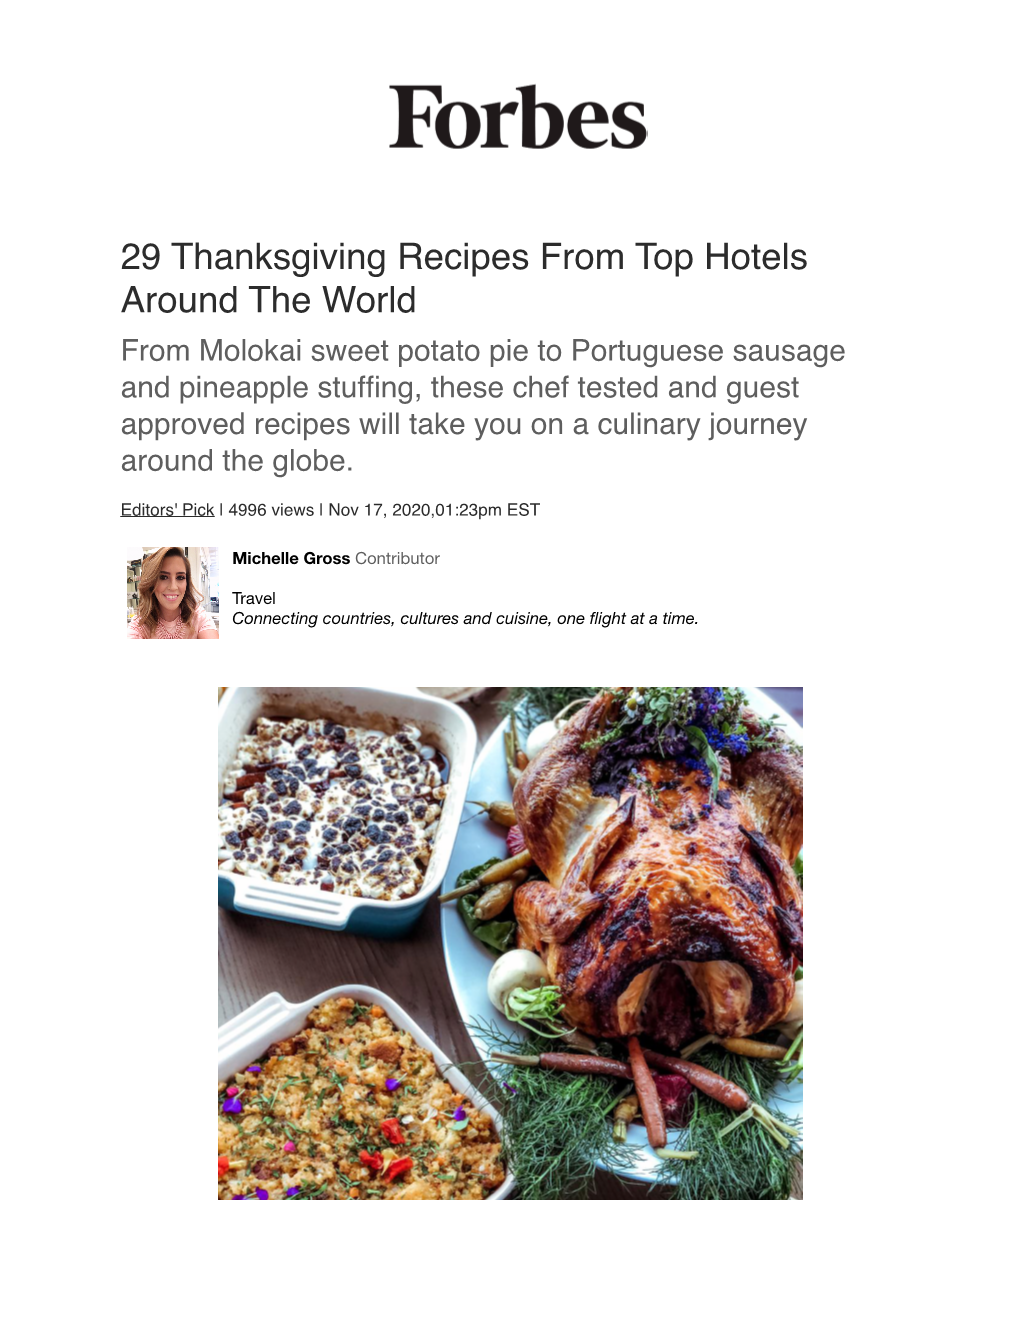 29 Thanksgiving Recipes from Top Hotels Around the World